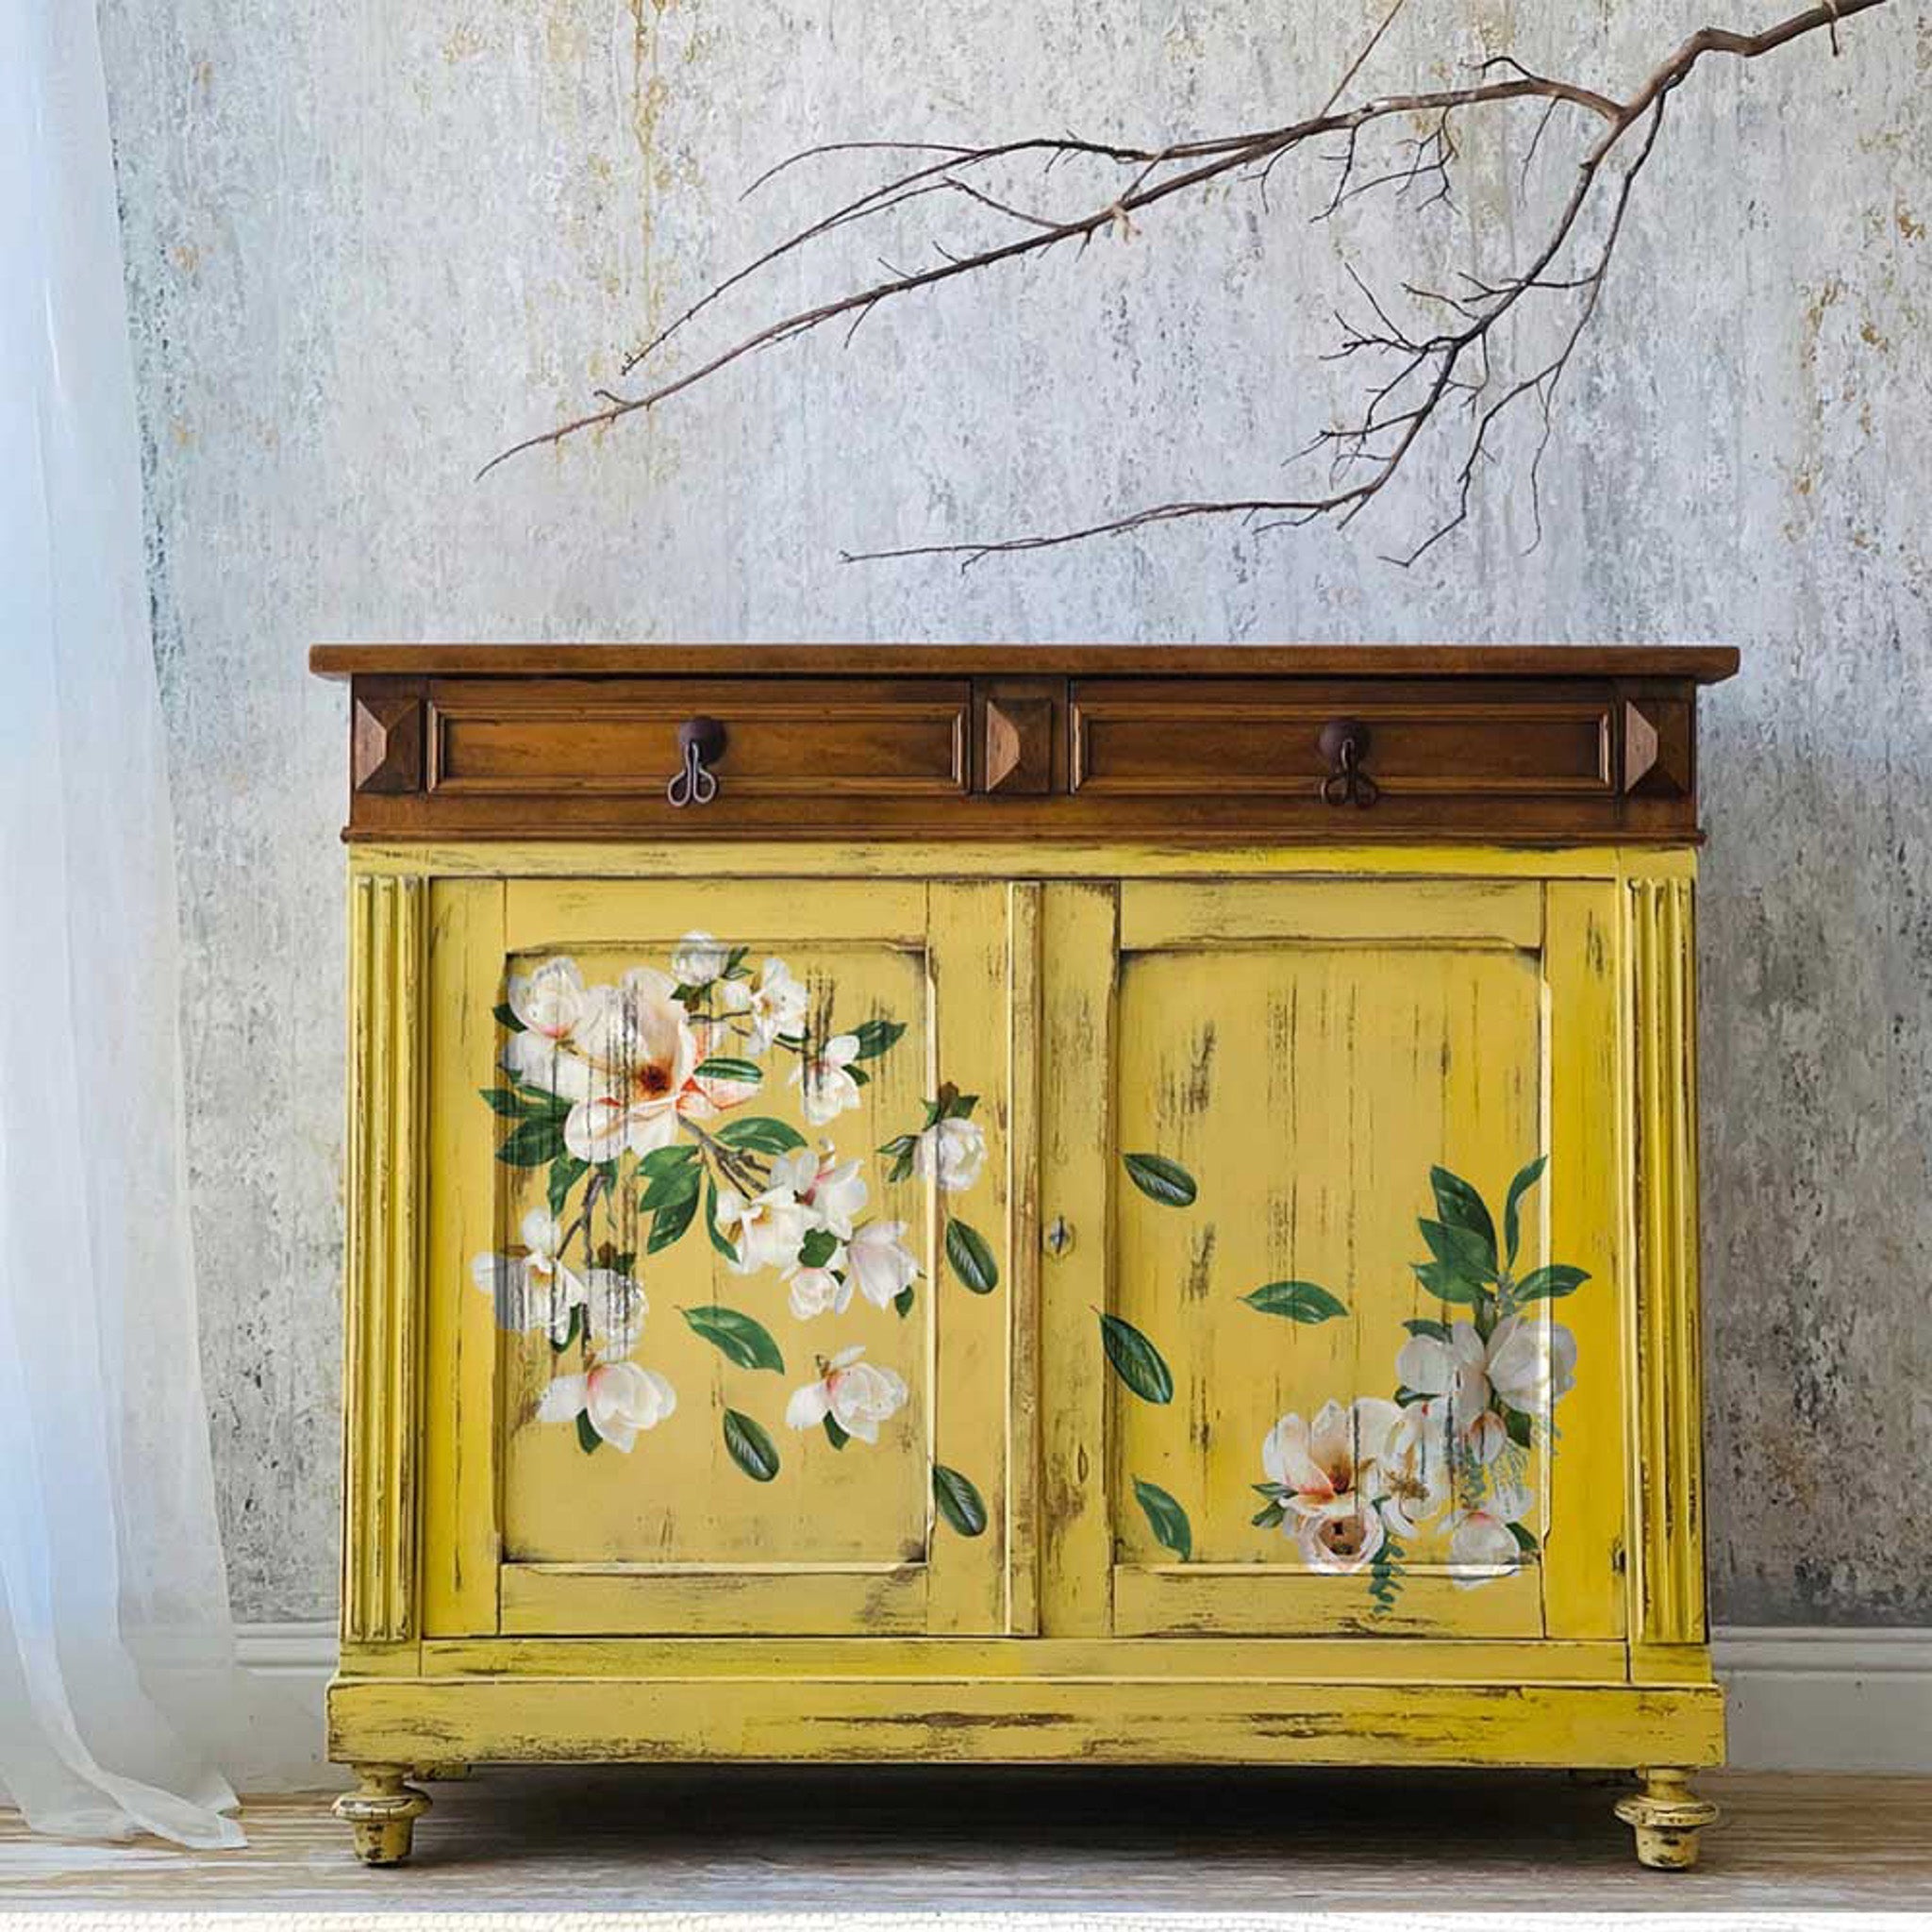 A small wood console table is painted yellow with natural wood stain and features ReDesign with Prima's La Gran Magnolia small transfer on its doors.